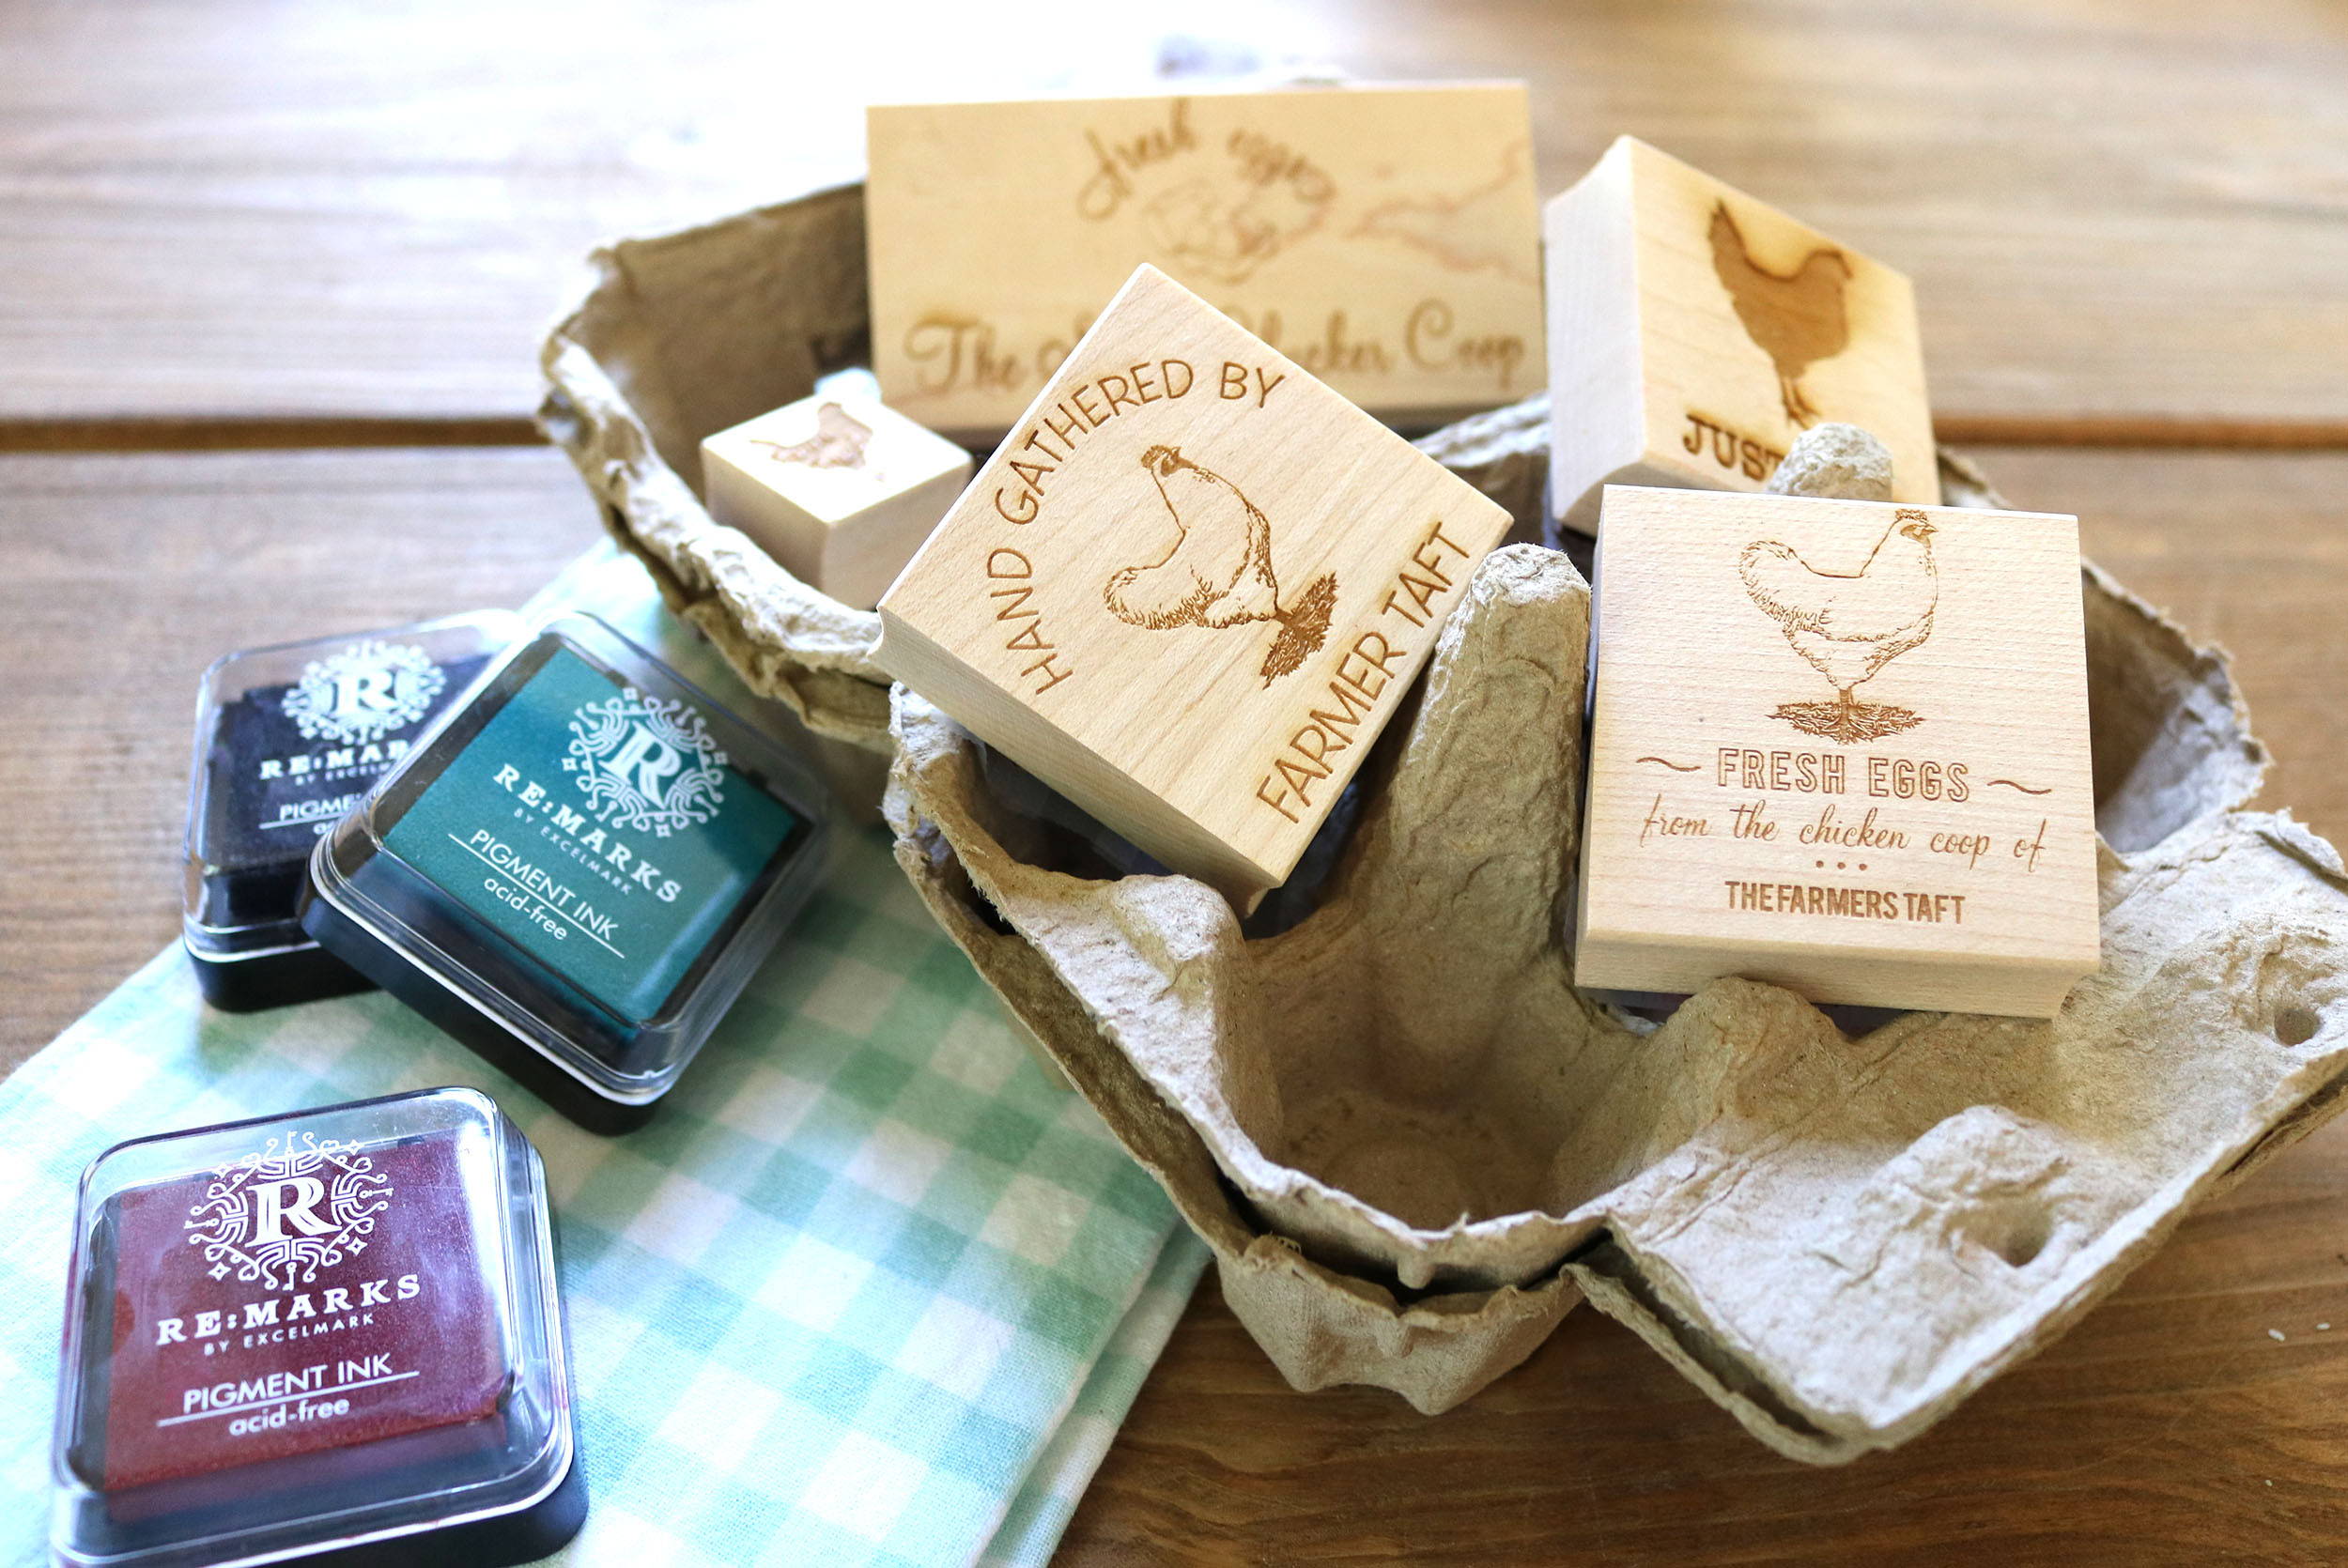 5 Ways to Use Chicken Egg Rubber Stamps –